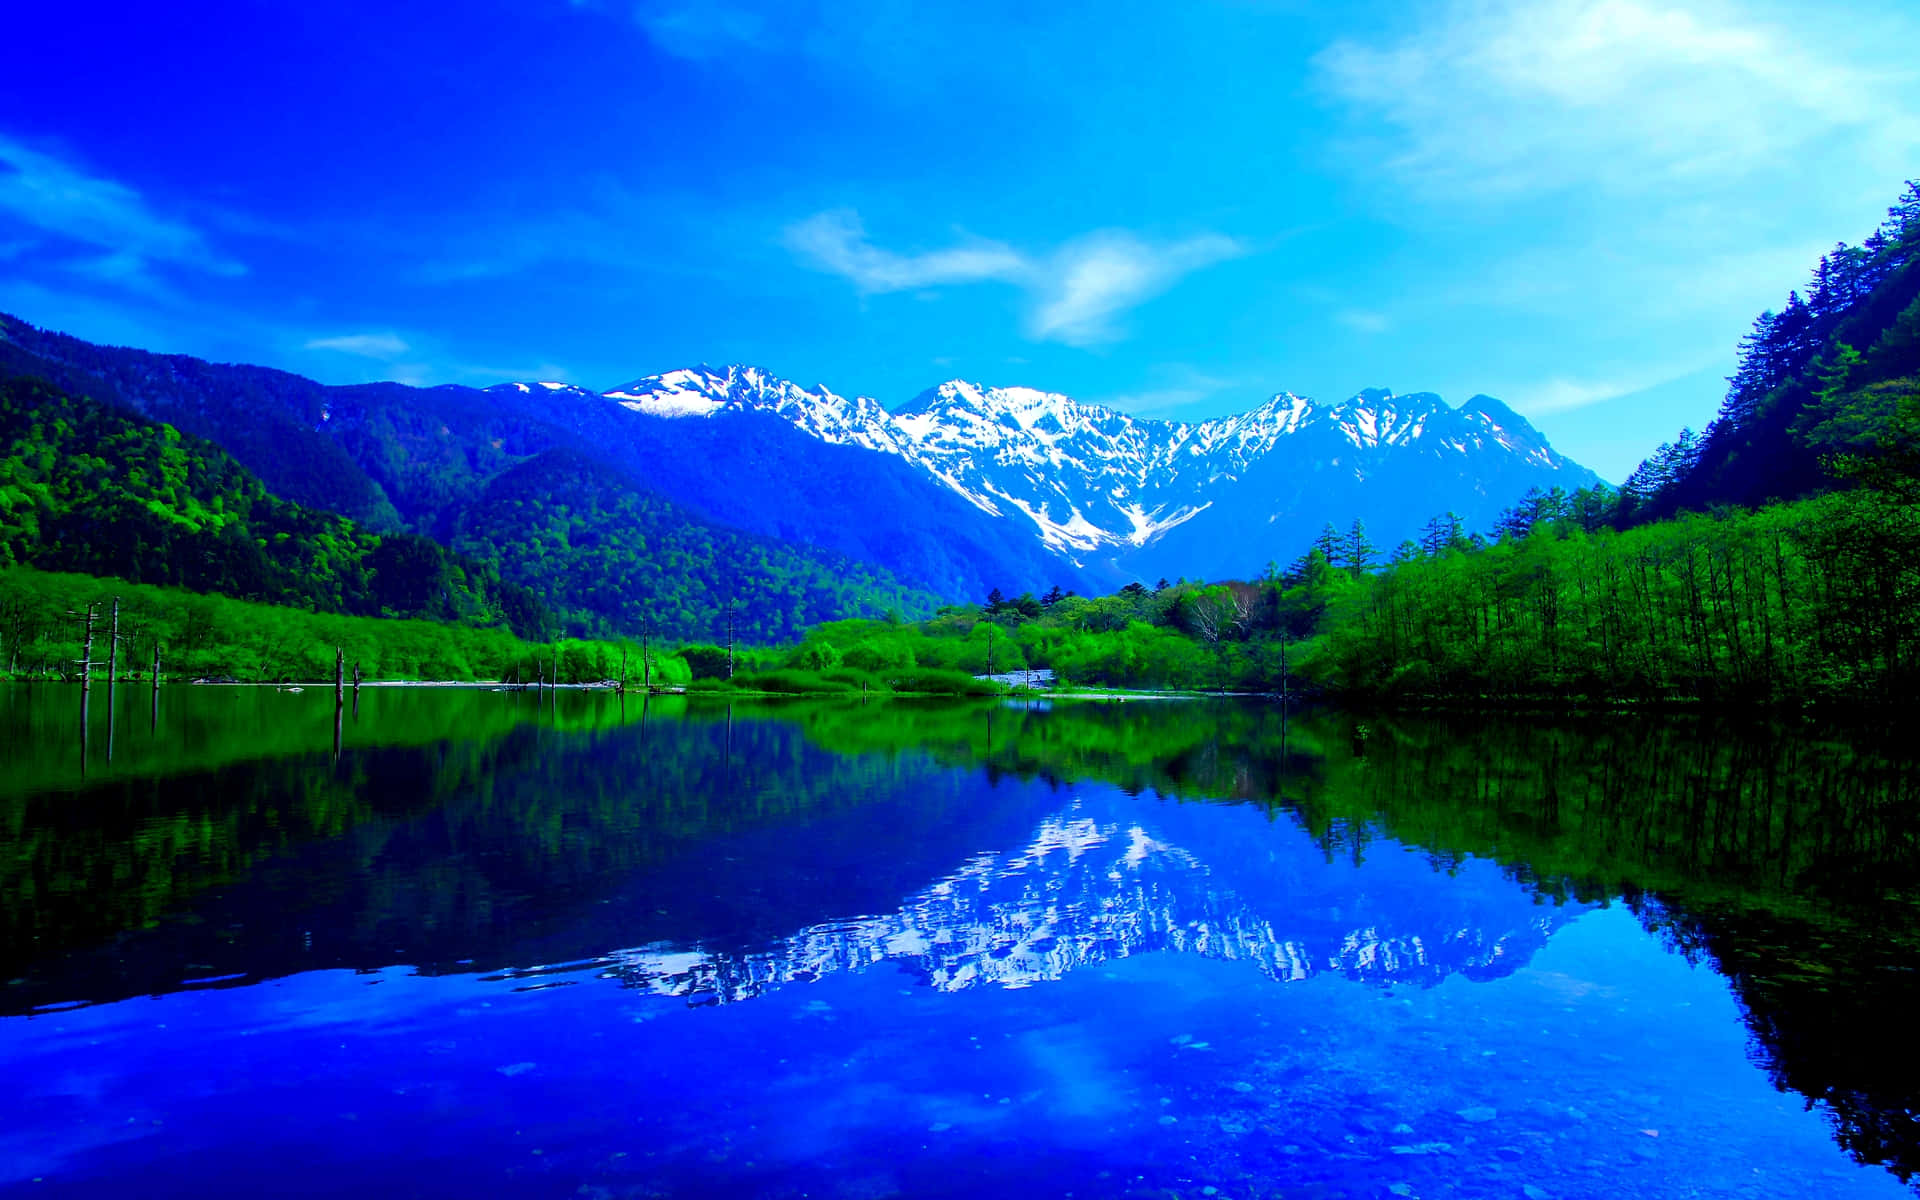 A Mountain Range Reflected In A Lake